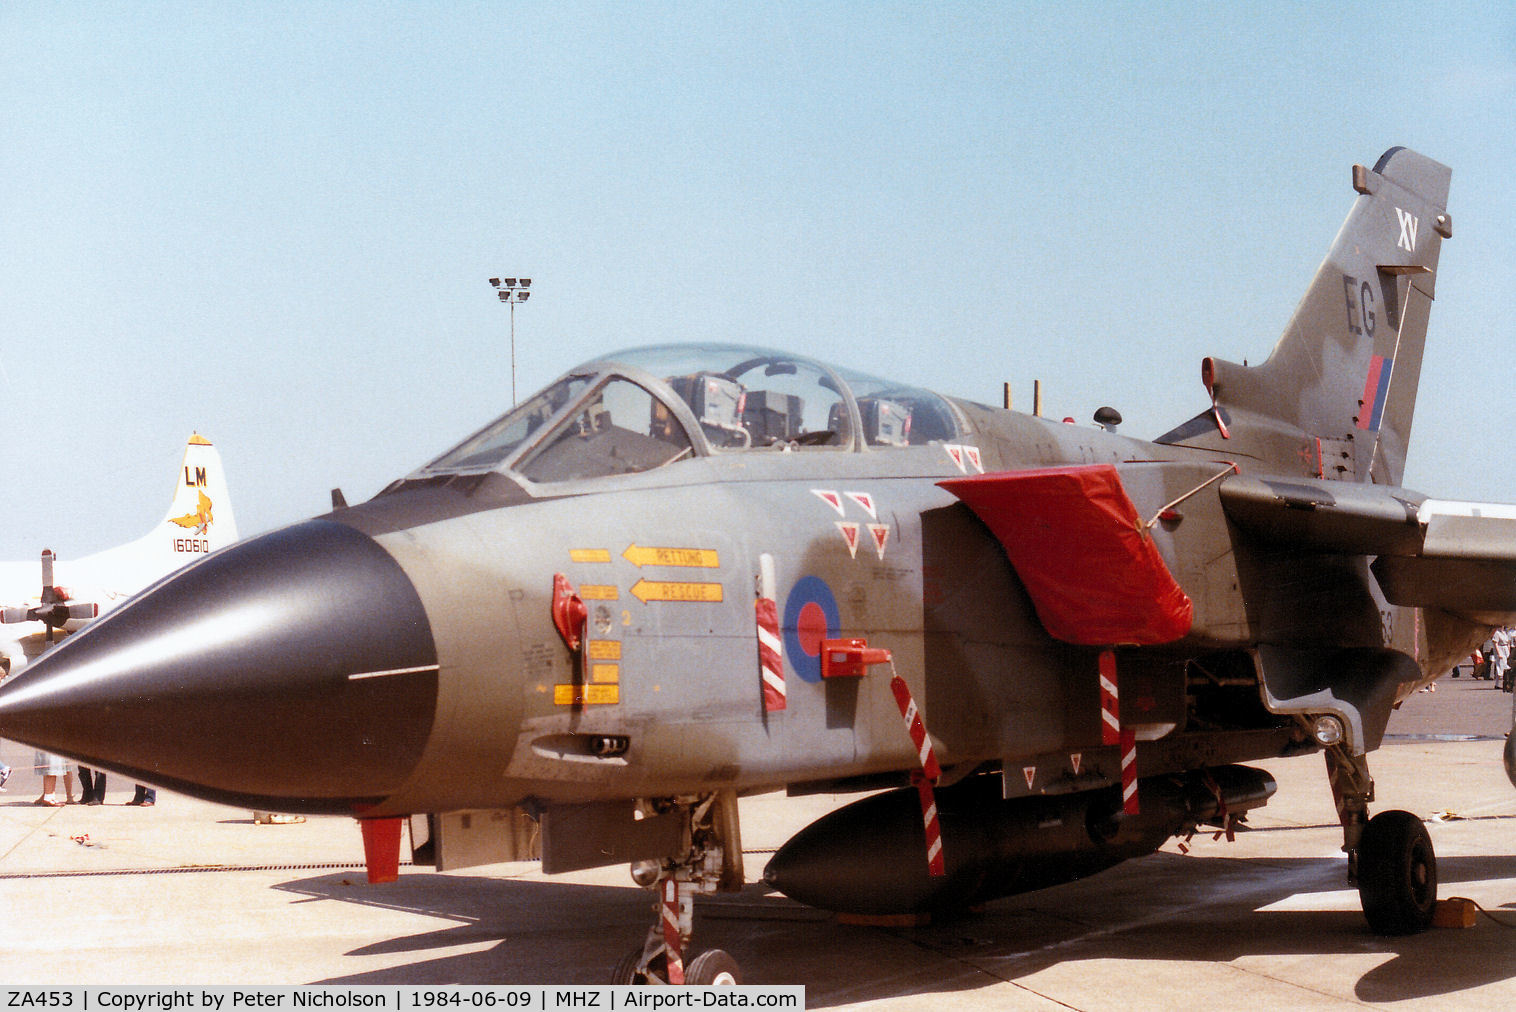 ZA453, 1983 Panavia Tornado GR.1B C/N BS083/249/3119, Another view of the RAF Bruggen Tornado GR.1 of 15 Squadron on display at the 1984 RAF Mildenhall Air Fete.